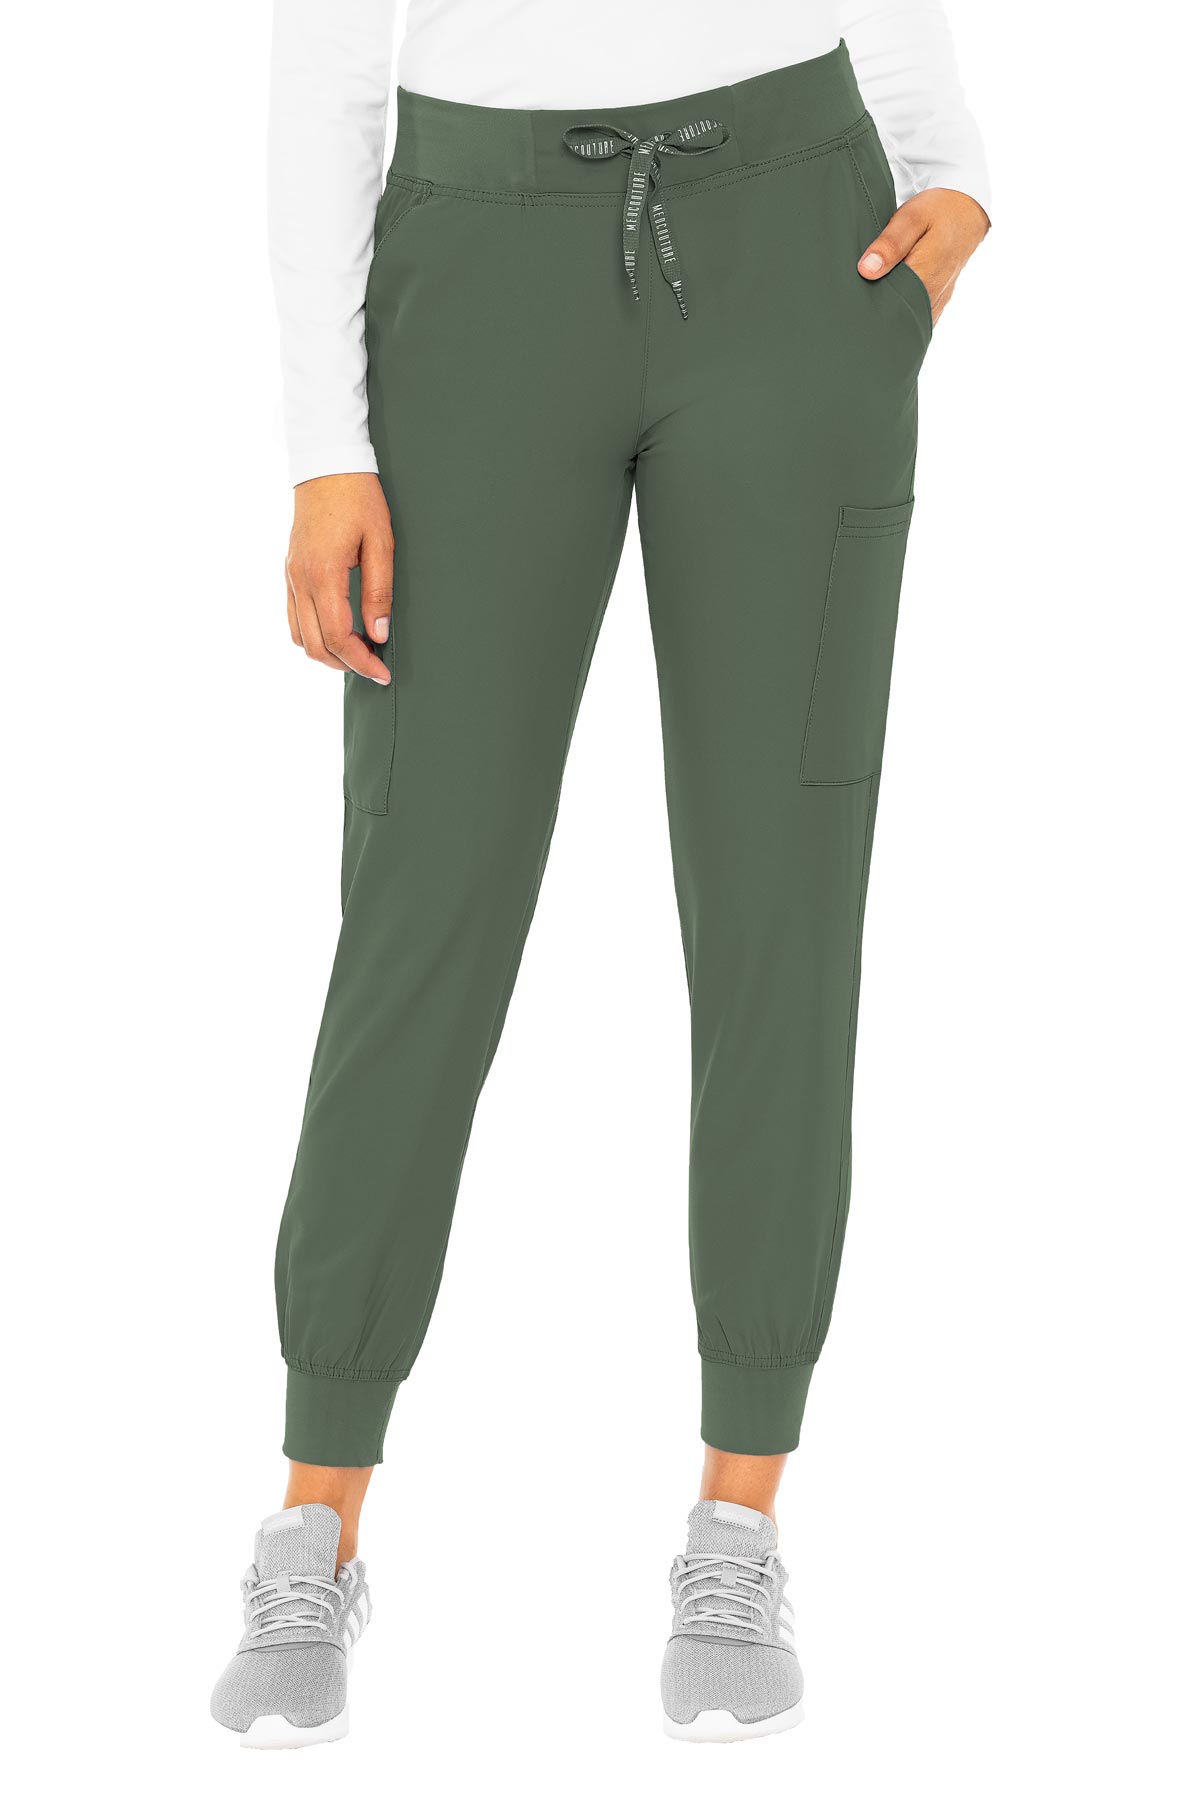 Women's Crested Adapted State Jogger Green - UBC Bookstore